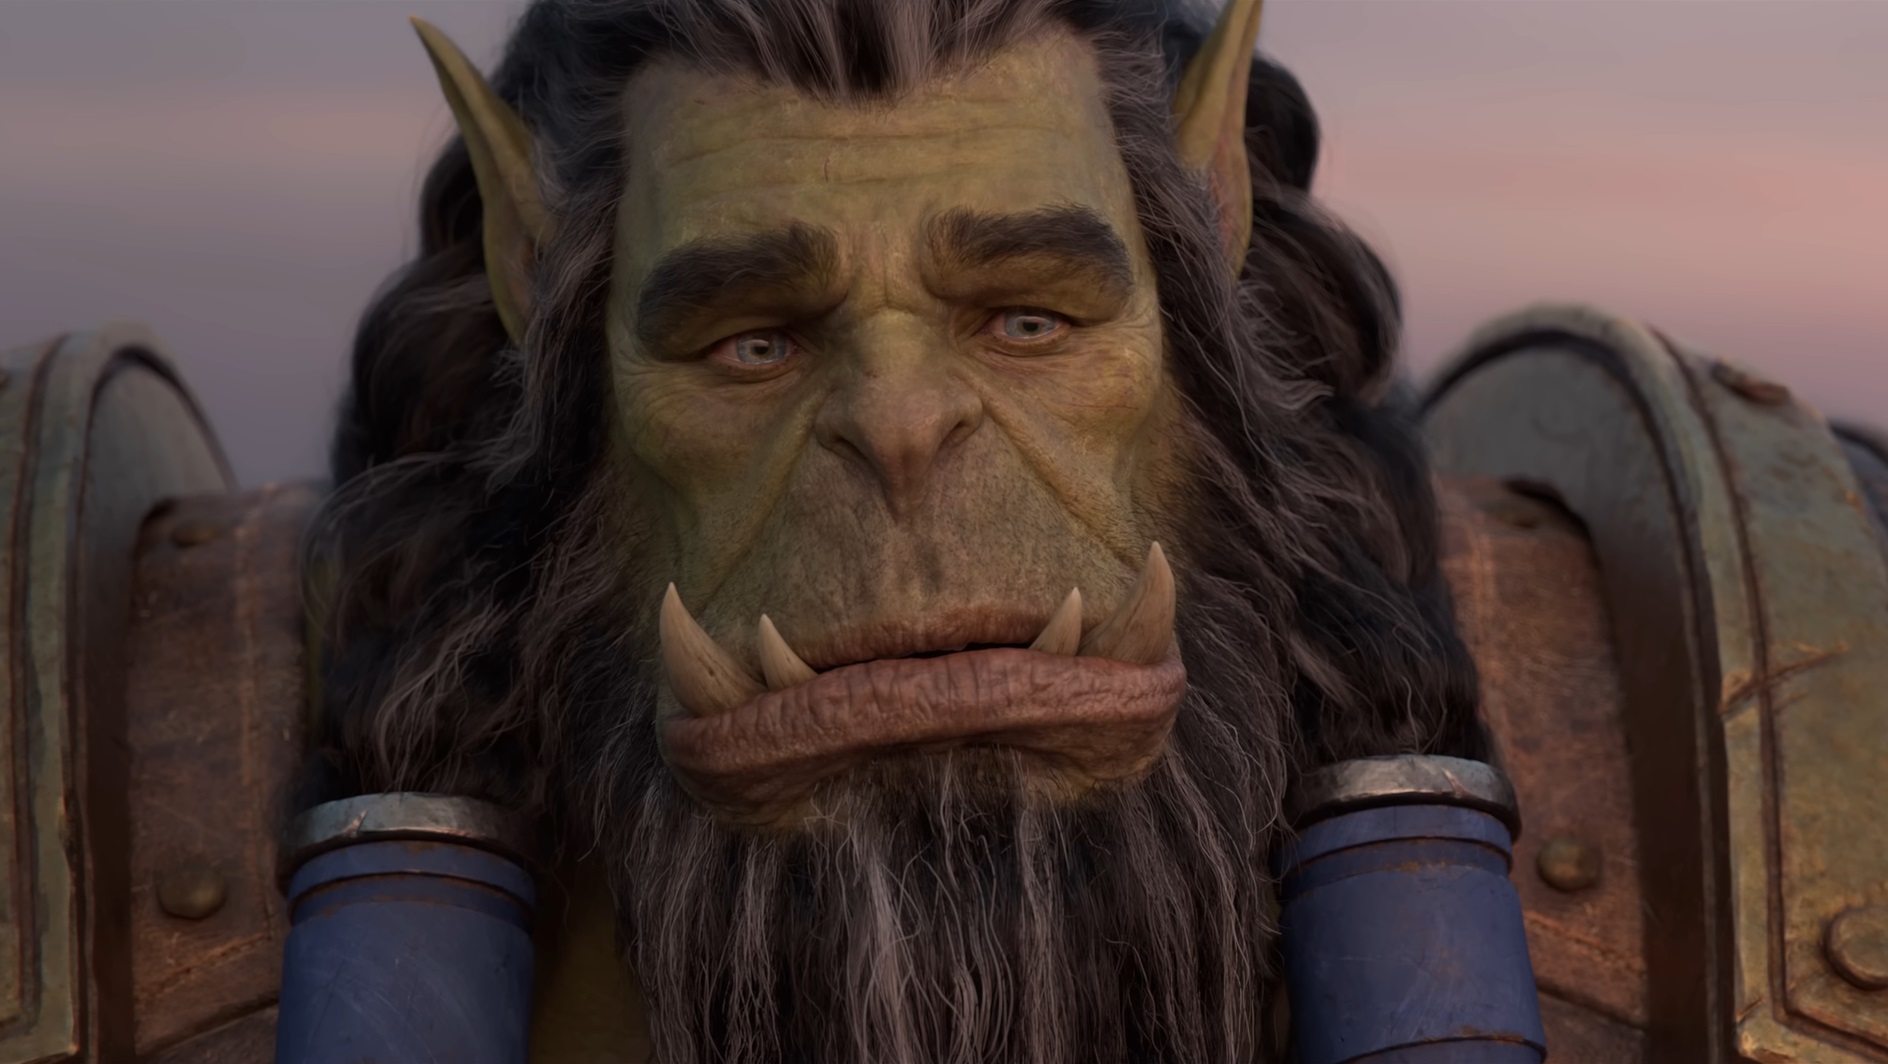 Warcraft’s game director explains why Blizzard debuted three expansions at once: ‘Speaking it out loud makes it real’